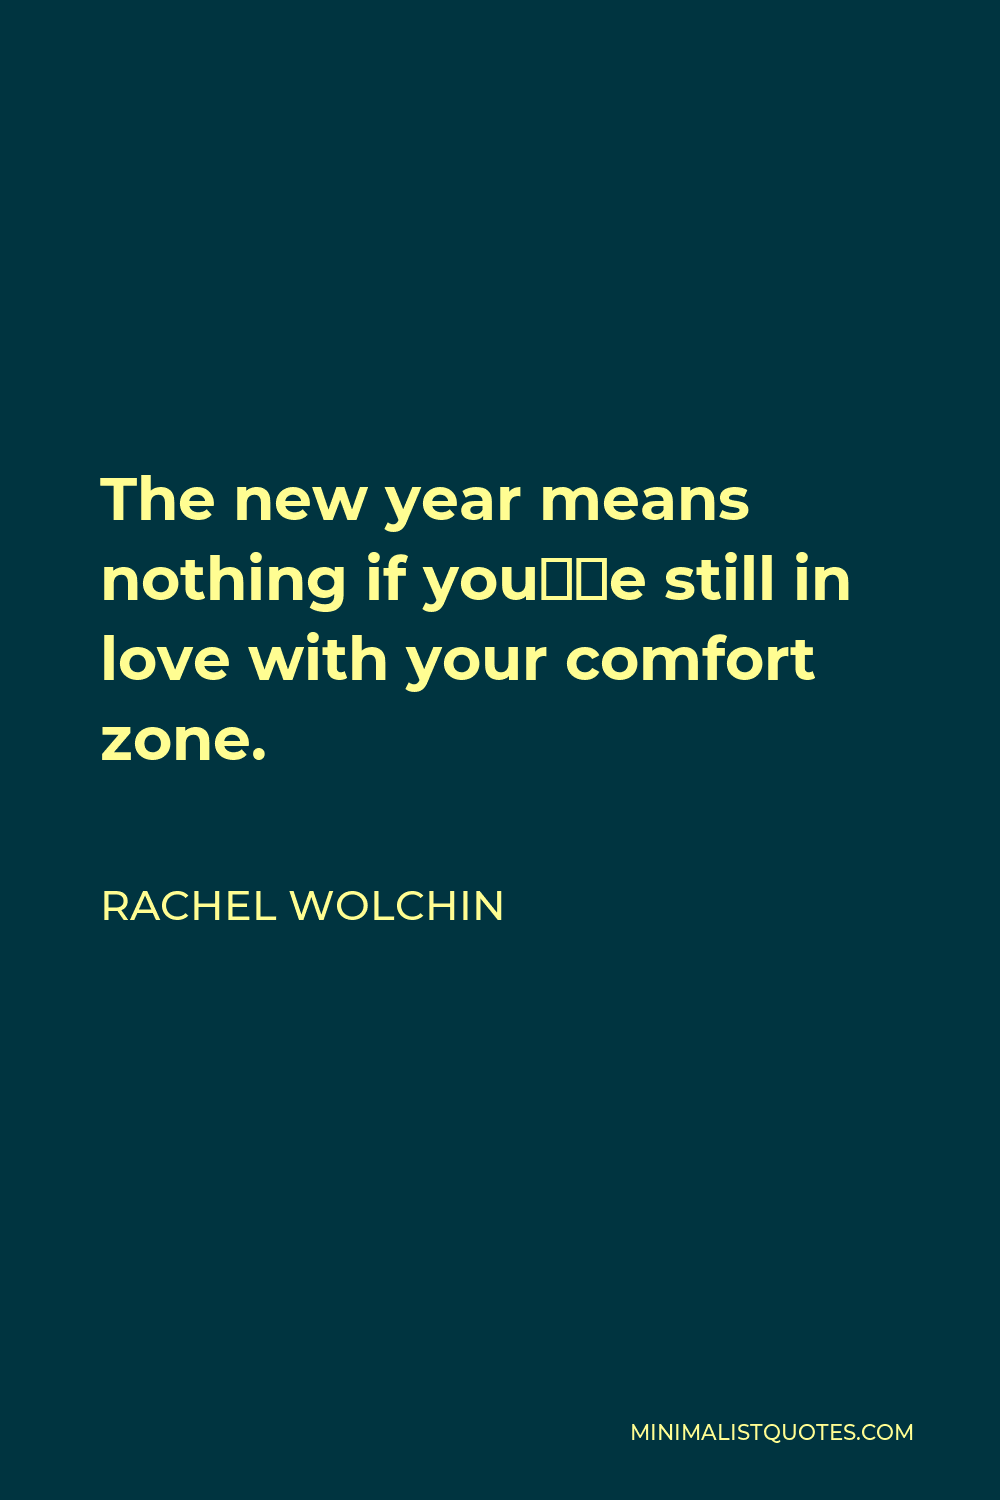 Rachel Wolchin Quote - The new year means nothing if you’re still in love with your comfort zone.